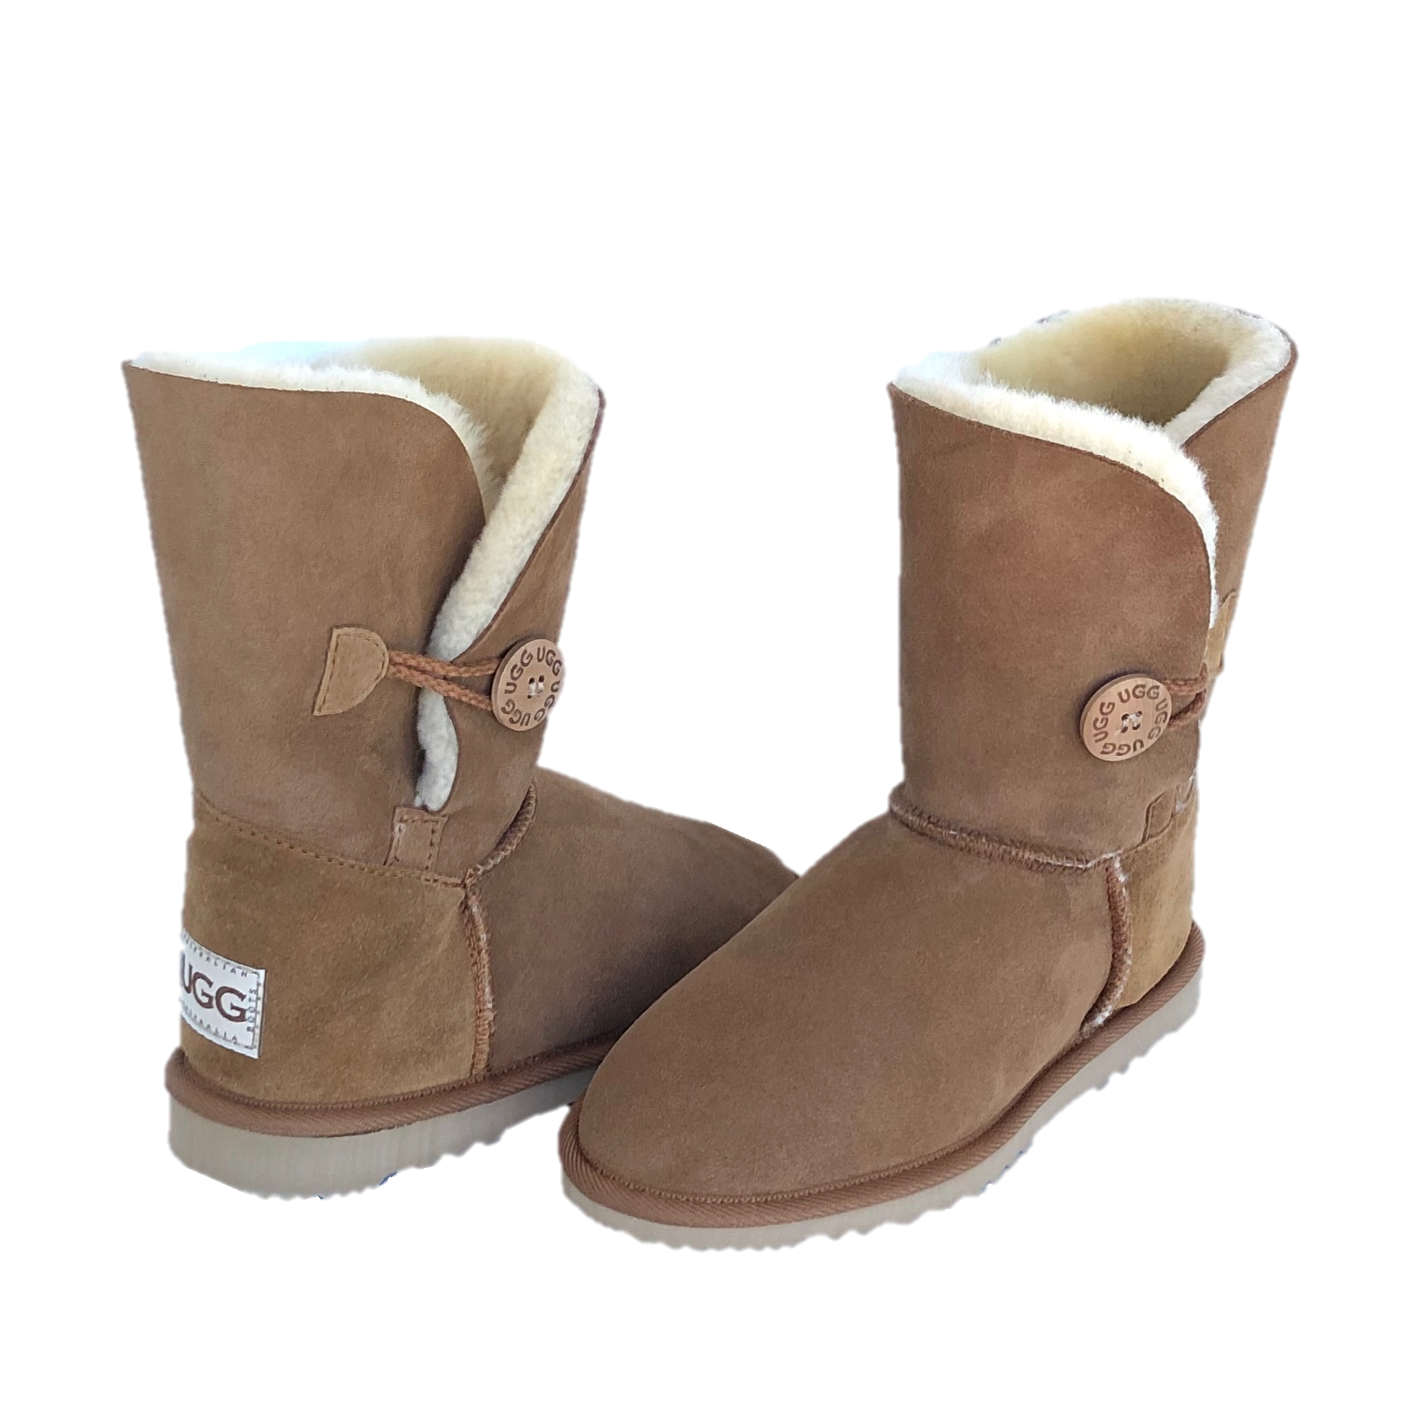 Chestnut Bella Button Boots short boots with circle button